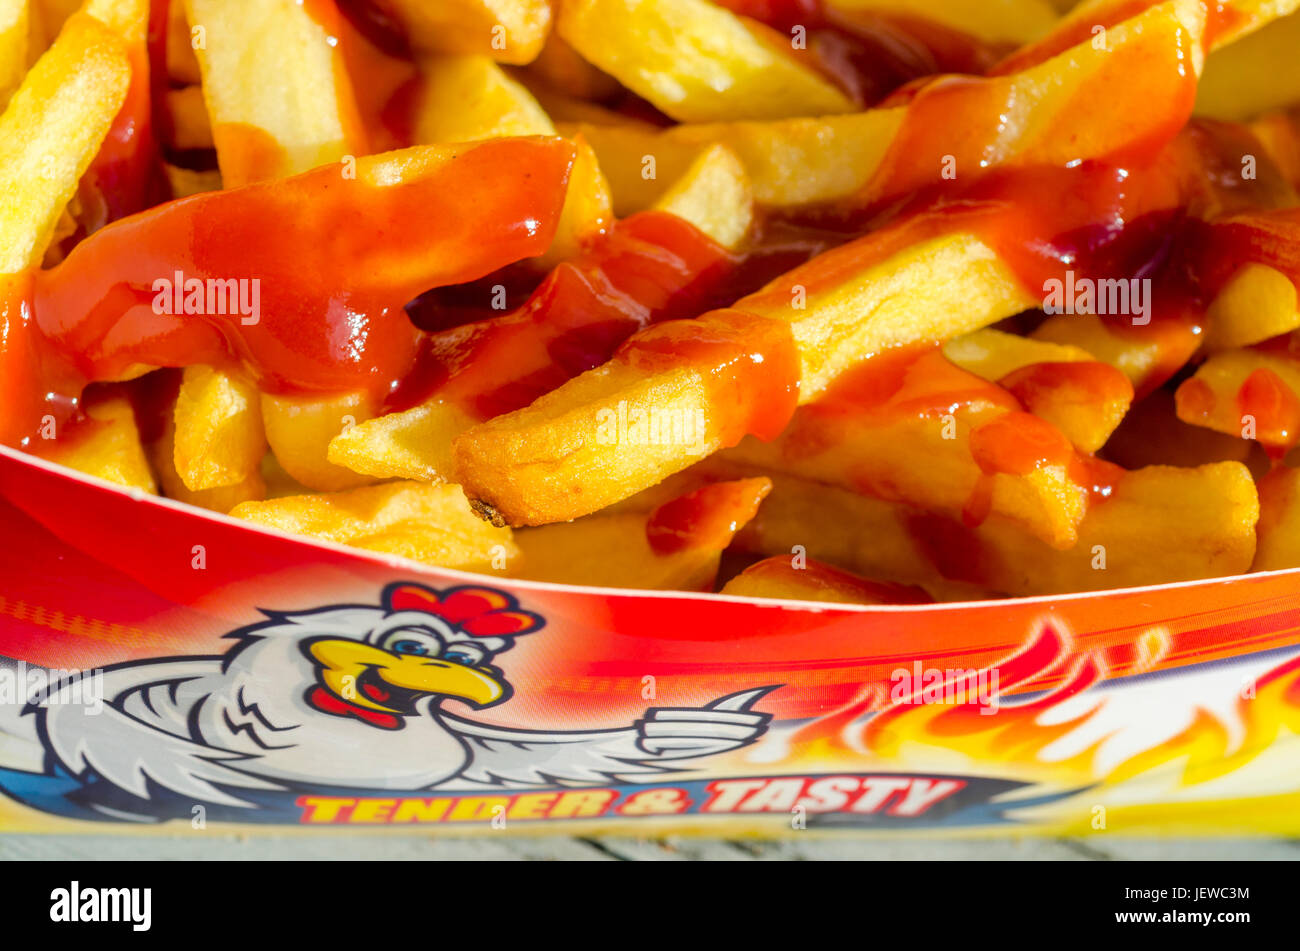 Portion of Take Away Chips with Tomato Sauce Stock Photo